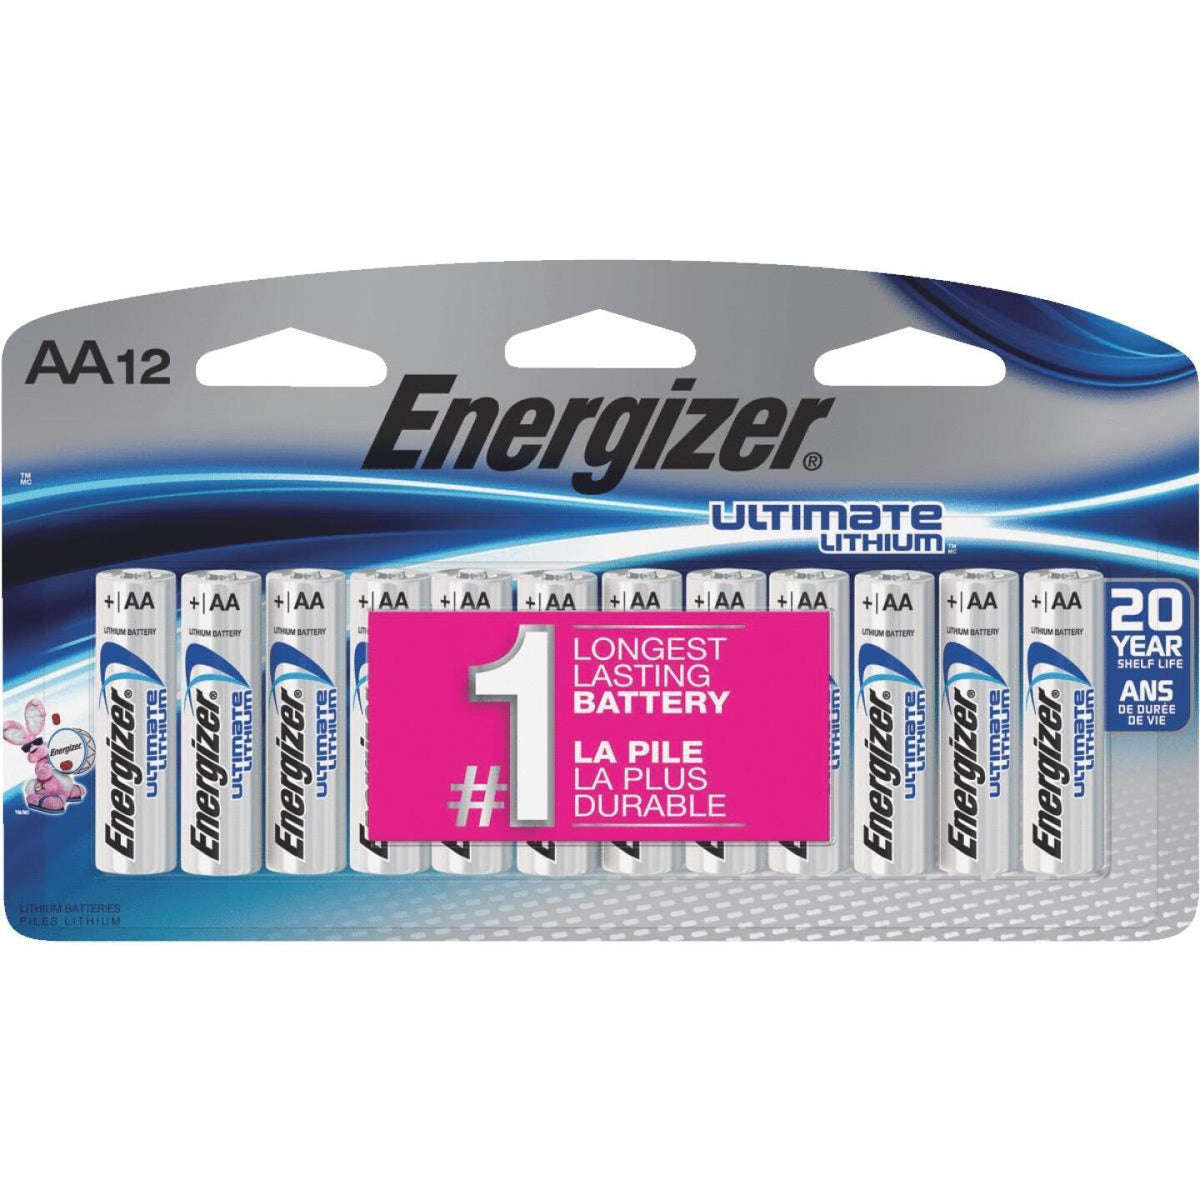 12 Energizer Ultimate Lithium AA Batteries Exp 2041 TWO - 6 Count